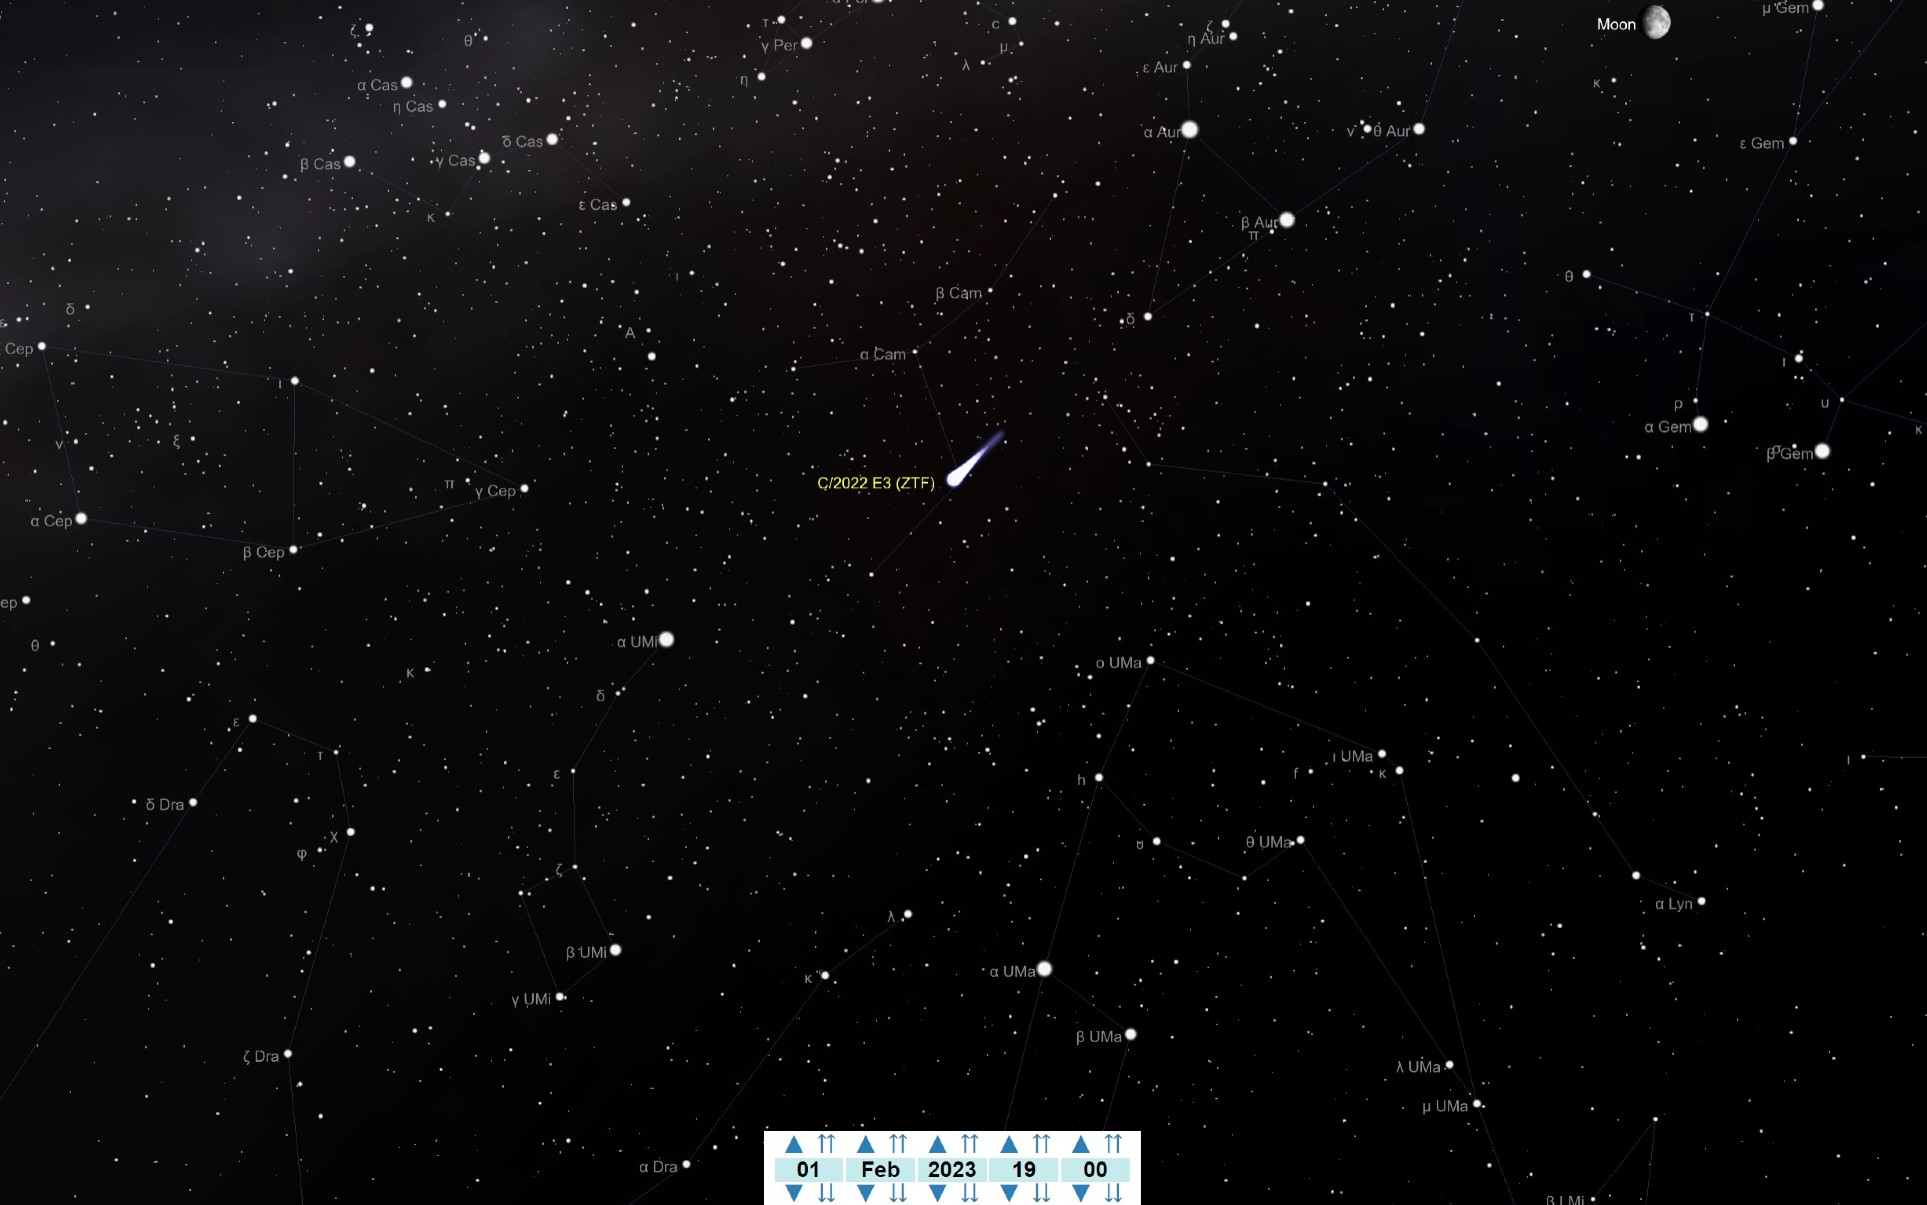 An illustration of the night sky on February 1st showing the position of Comet C/2022 E3 (ZTF) near the constellation Camelopardalis.